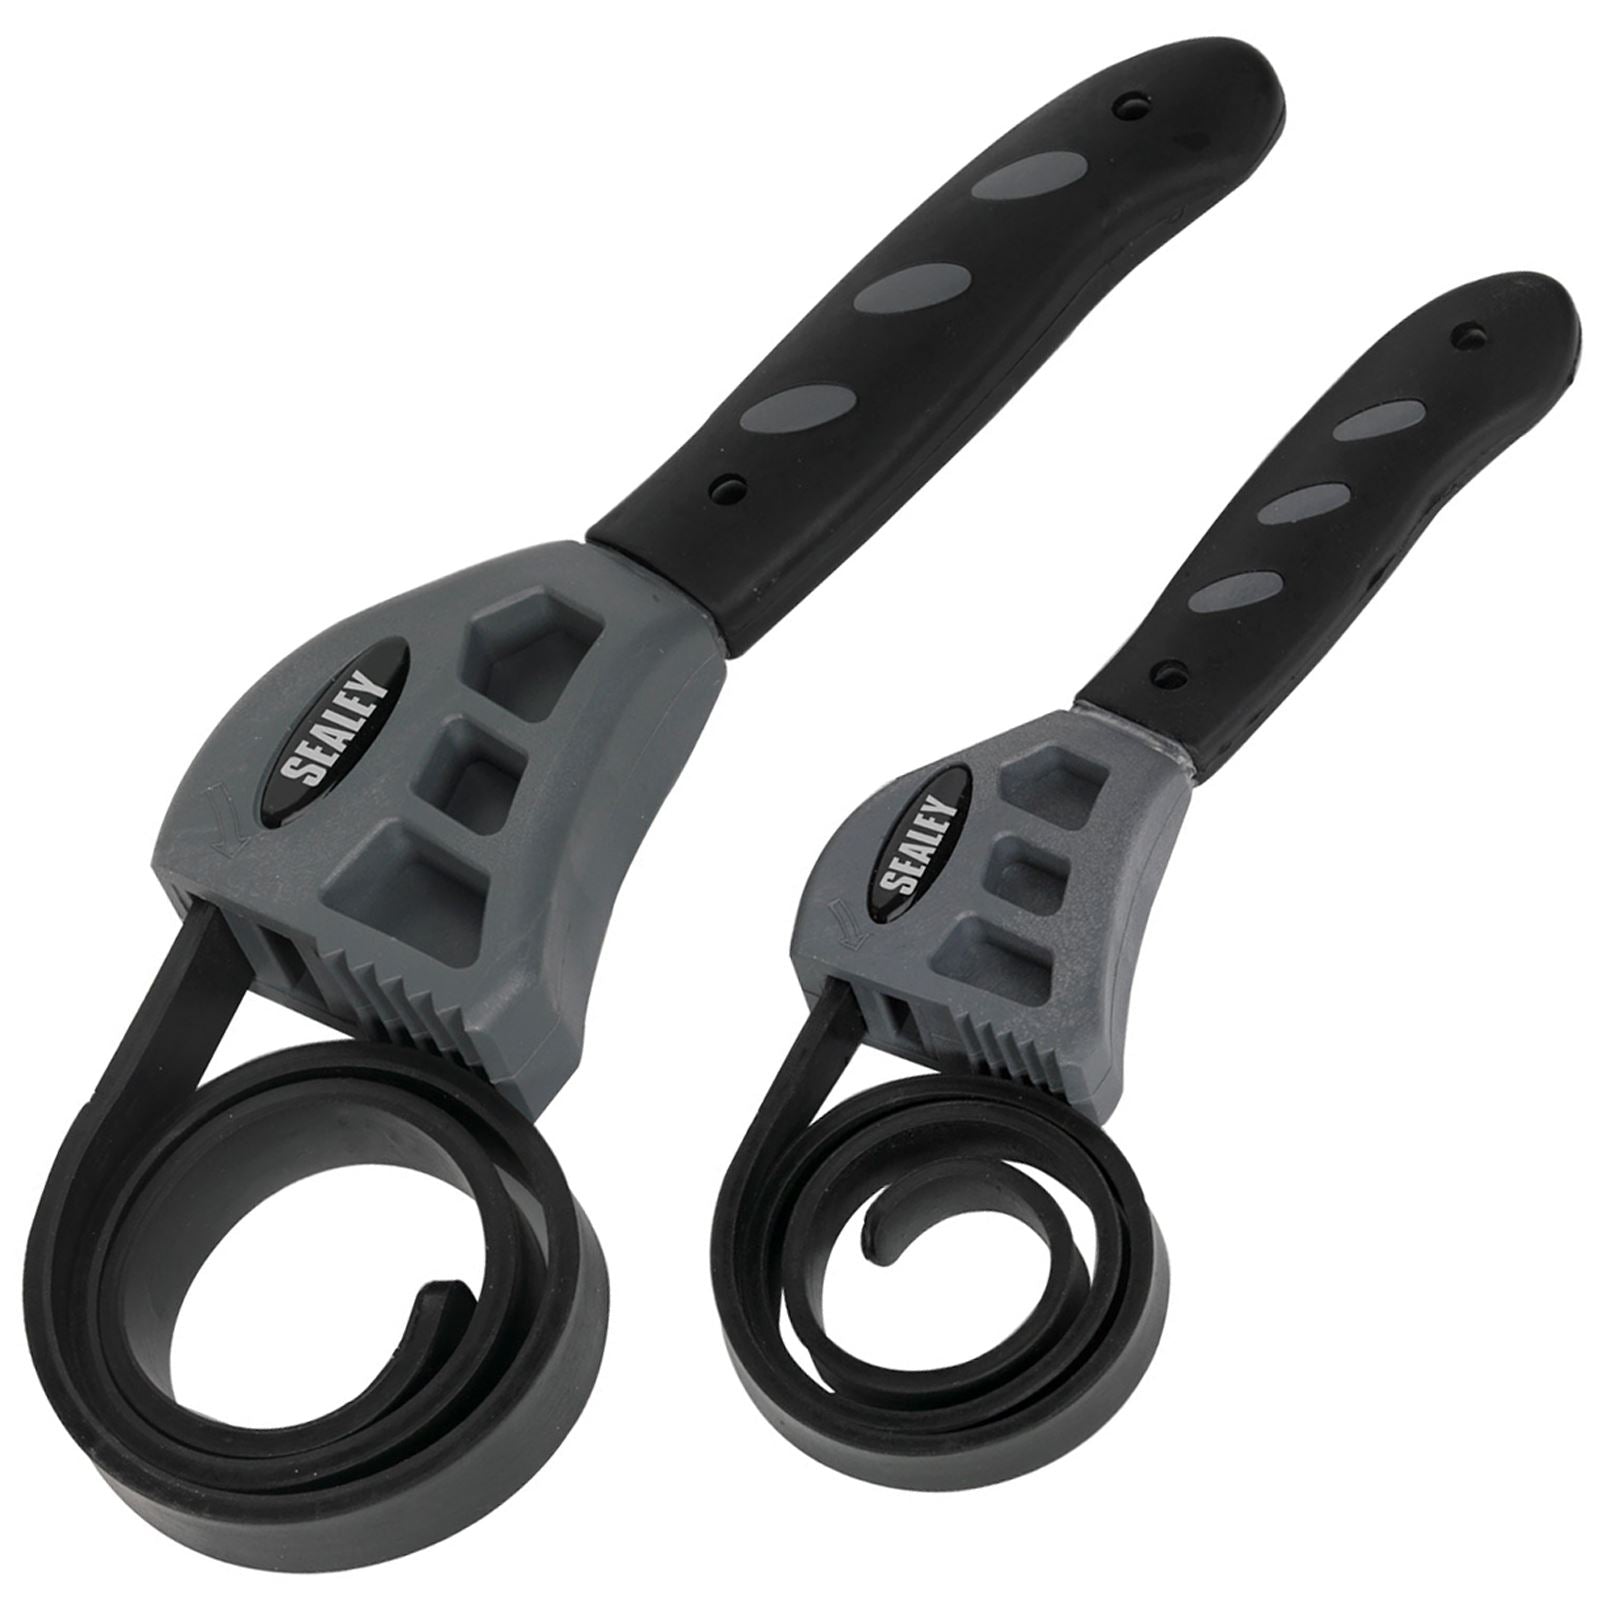 Sealey 2 Piece Strap Wrench Set Oil Filter Removal Installation Soft Grip Handle